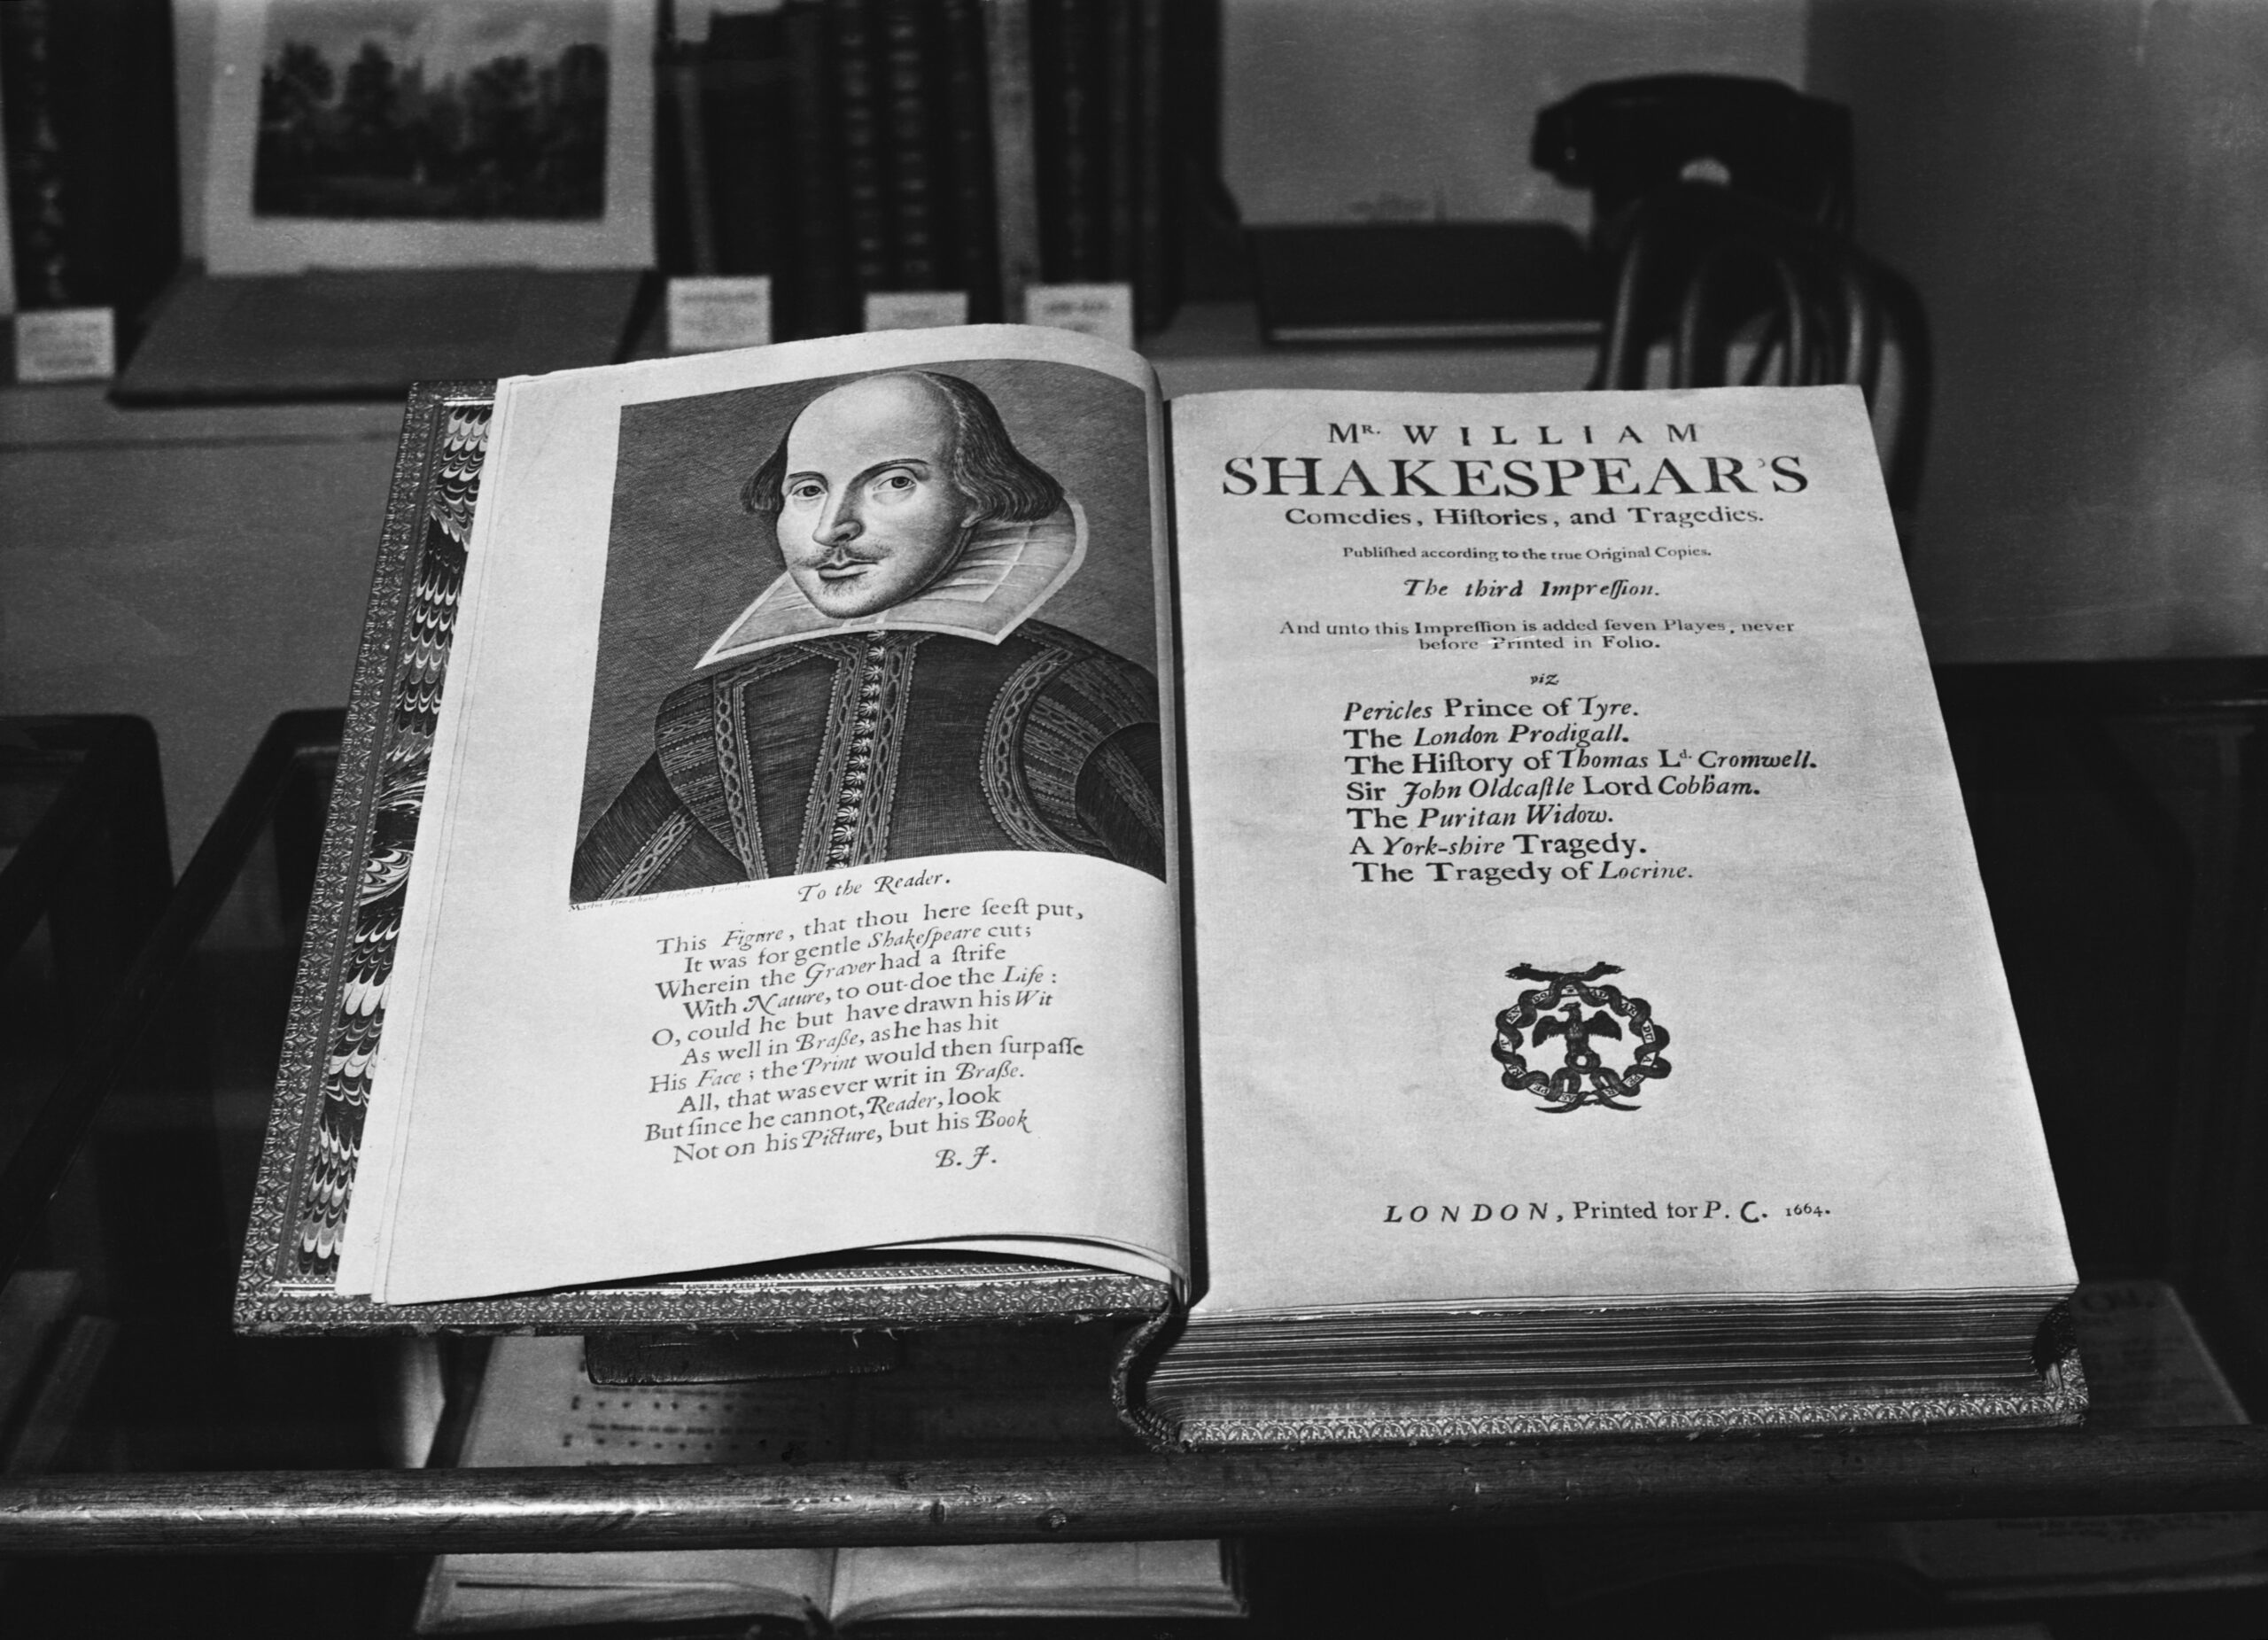 Antiques Dealers' Fair and Exhibition is to be opened tomorrow in the Great Hall at Grosvenor House, Park Lane, London, W., by Mrs Winston Churchill, wife of the Prime Minister. 10/6/52. Antique Dealers' Fair: a copy of the third Folio edition of Shakespeare. Printed in 1664. (Photo Credit: Hulton-Deutsch Collection/CORBIS/Corbis via Getty Images)